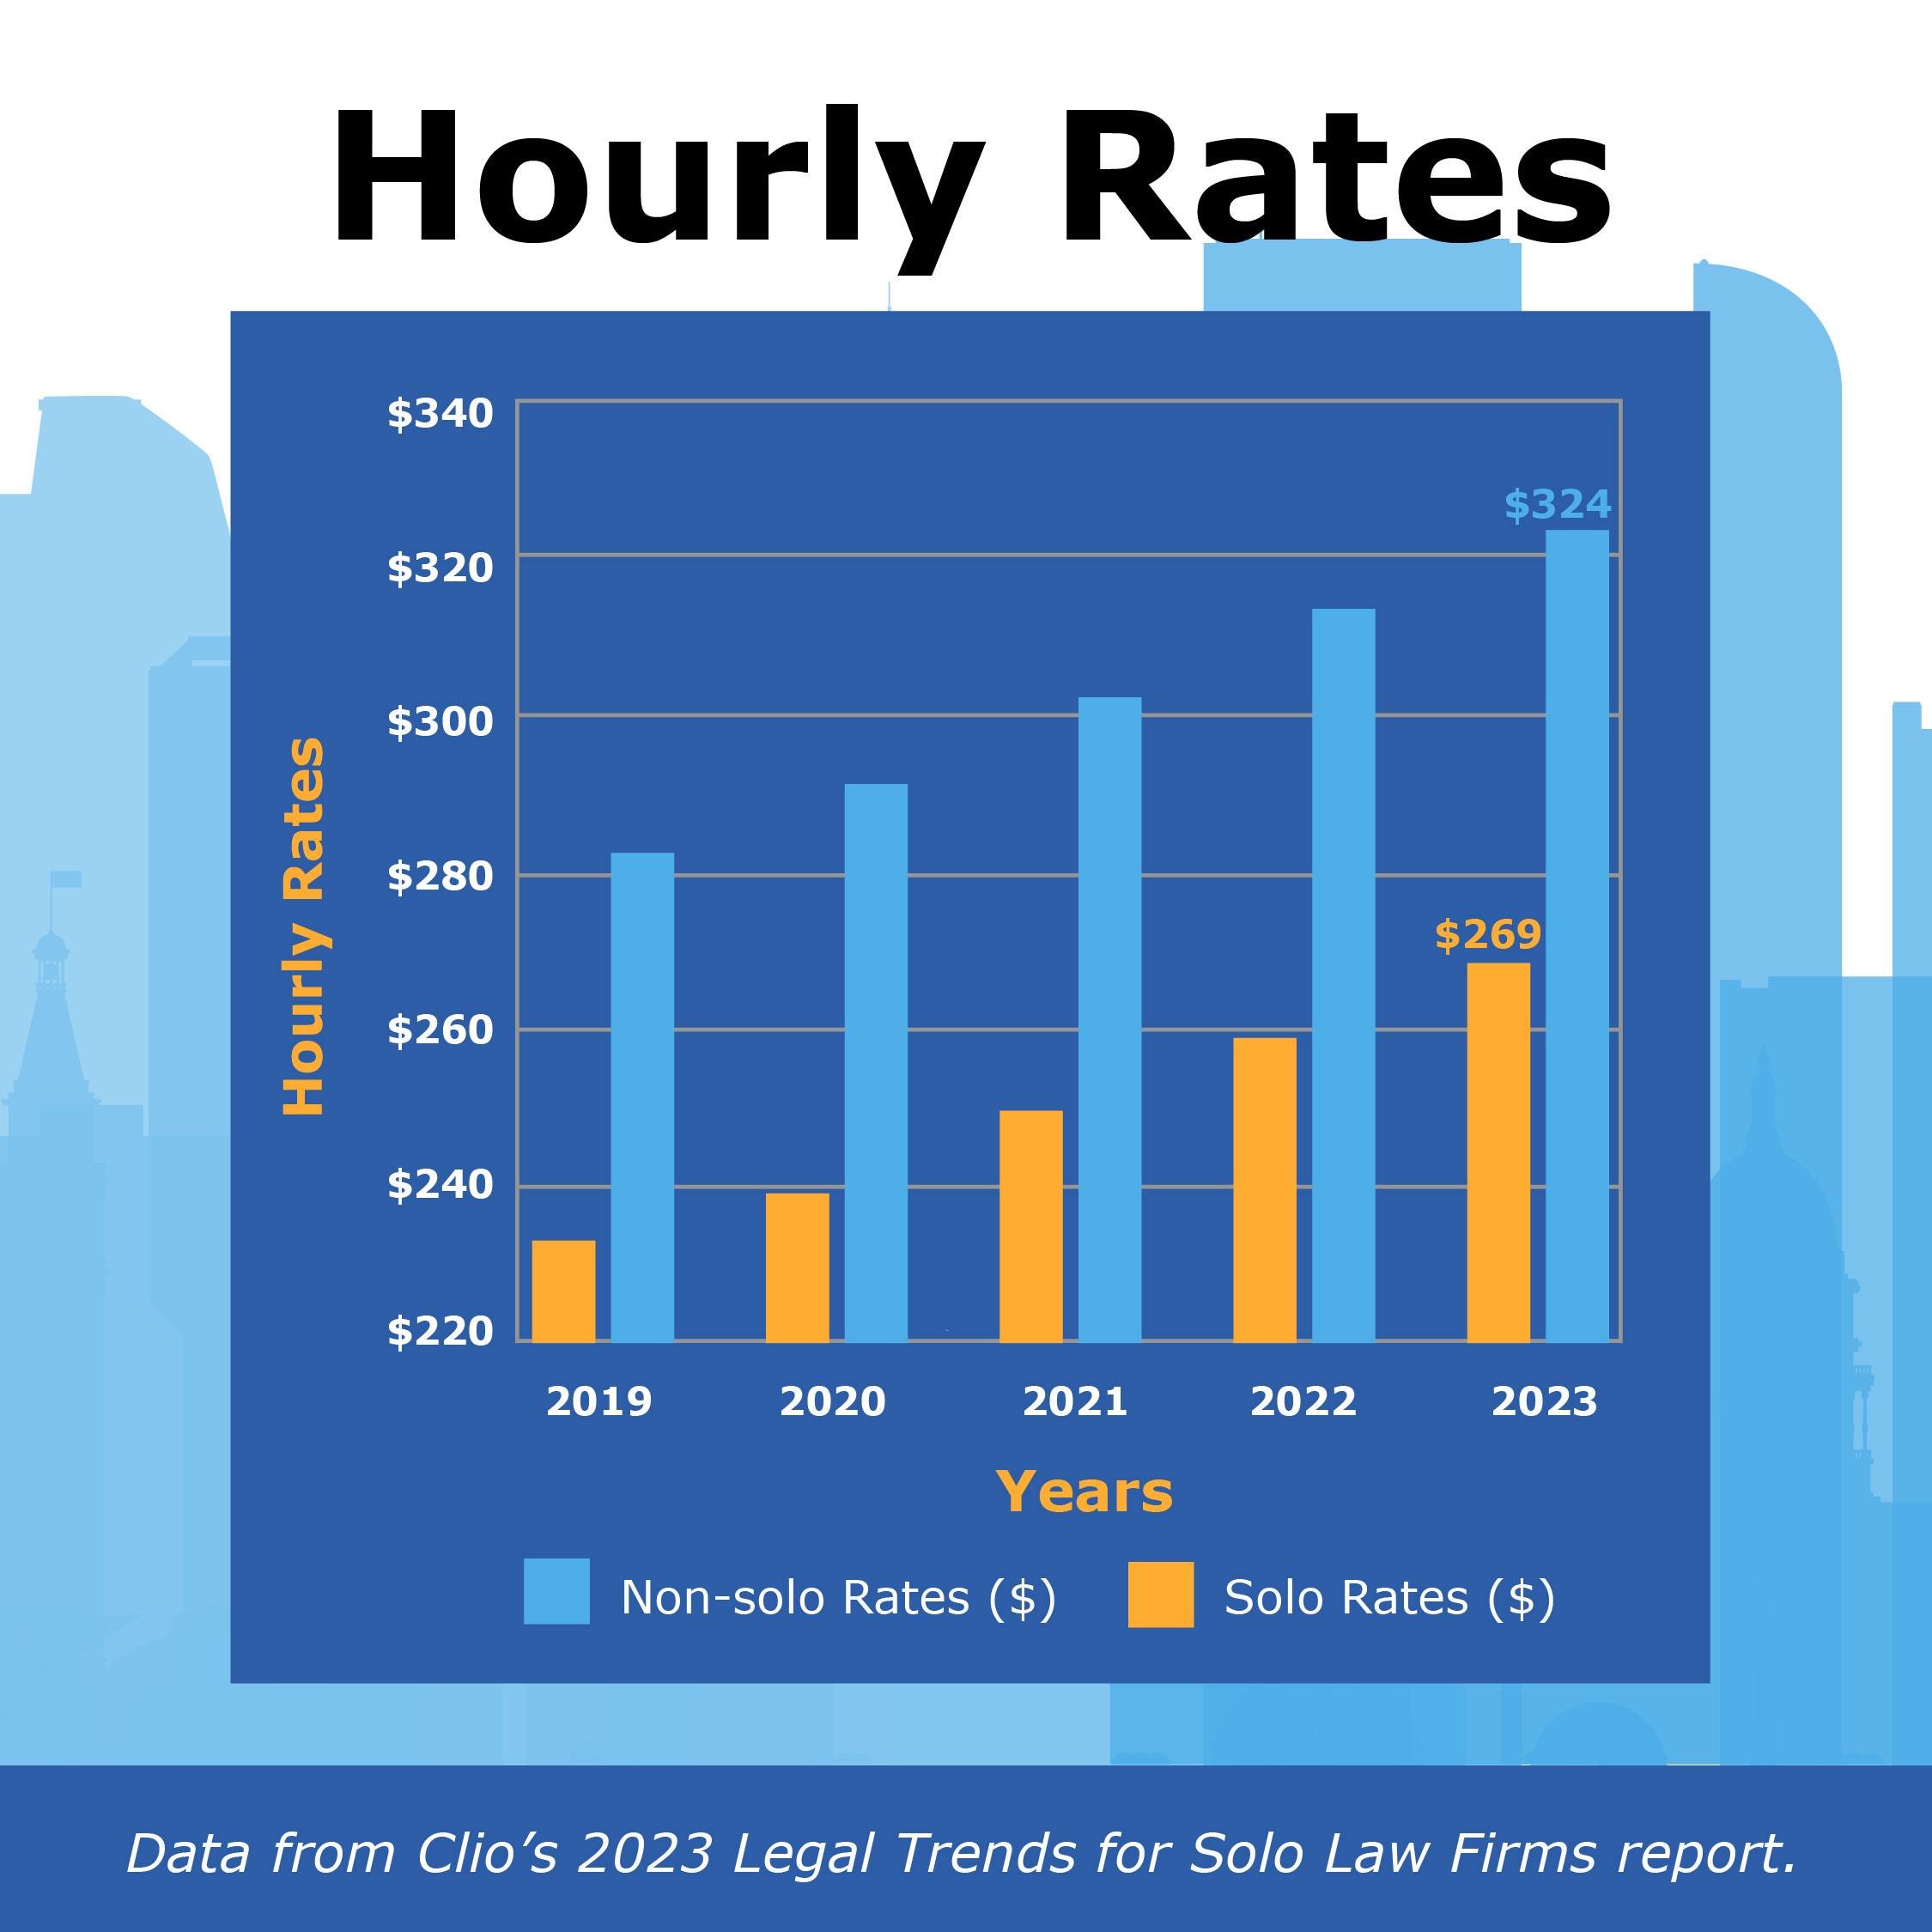 Data from Clio’s 2023 Legal Trends for Solo Law Firms report shows solo attorneys may have higher hourly rates than non-solo attorneys. From 2019 to 2023, Clio found solos saw in increase in hourly rates with $324 by 2023 compared to $269 for non-solos. 